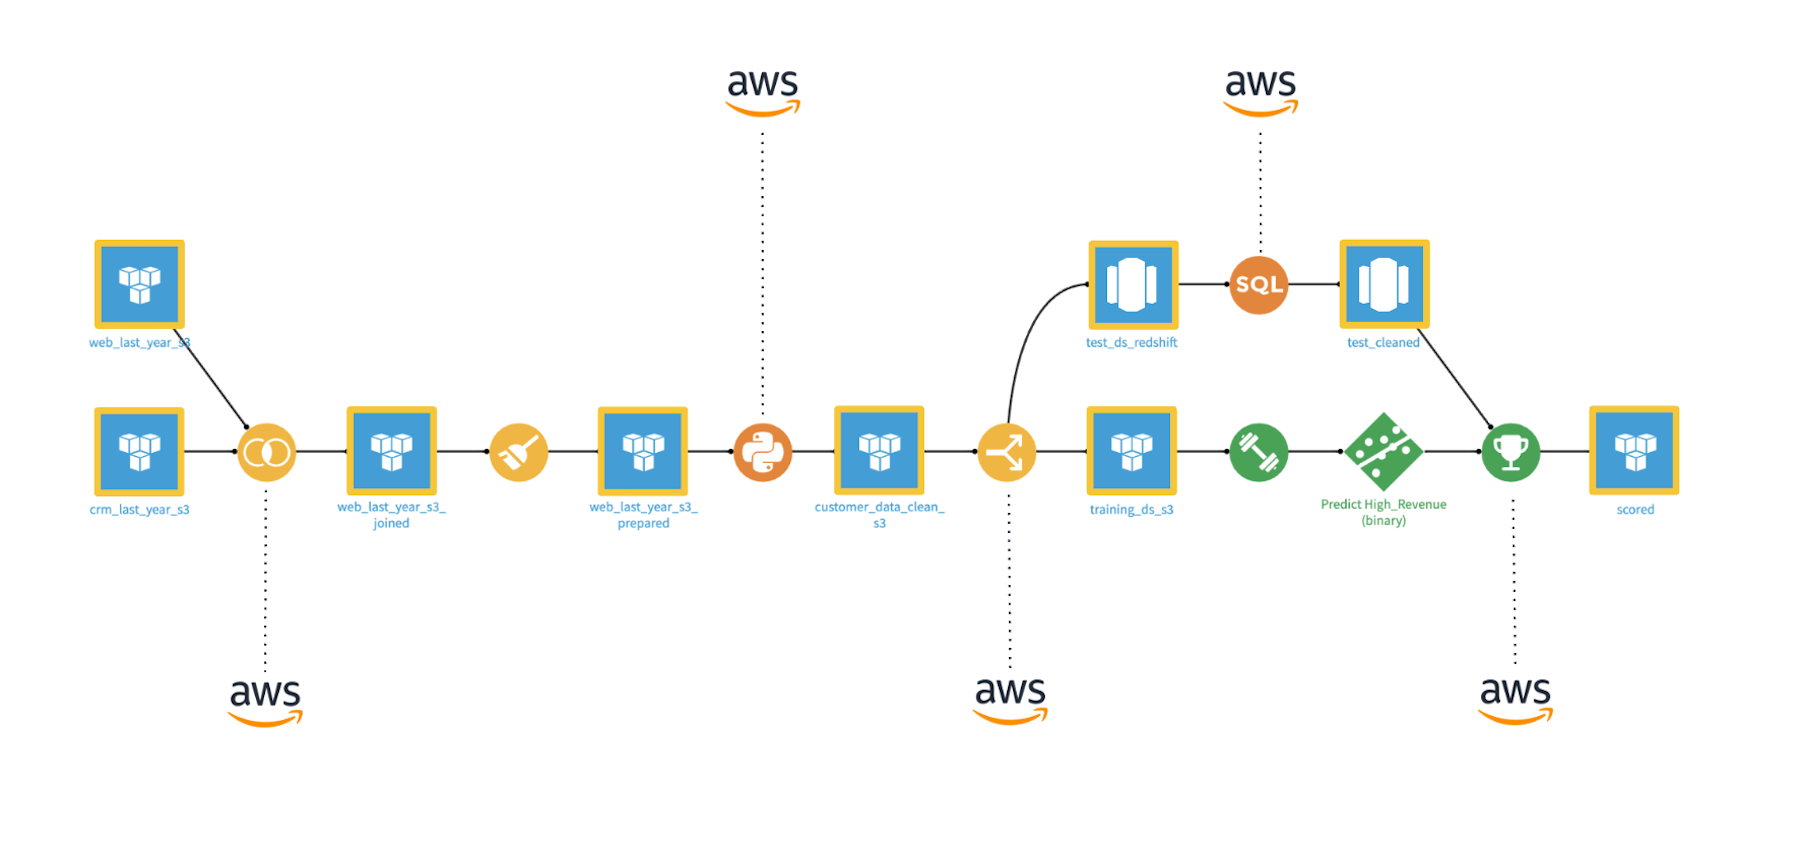 dataiku flow leveraging AWS cloud services and infrastructure